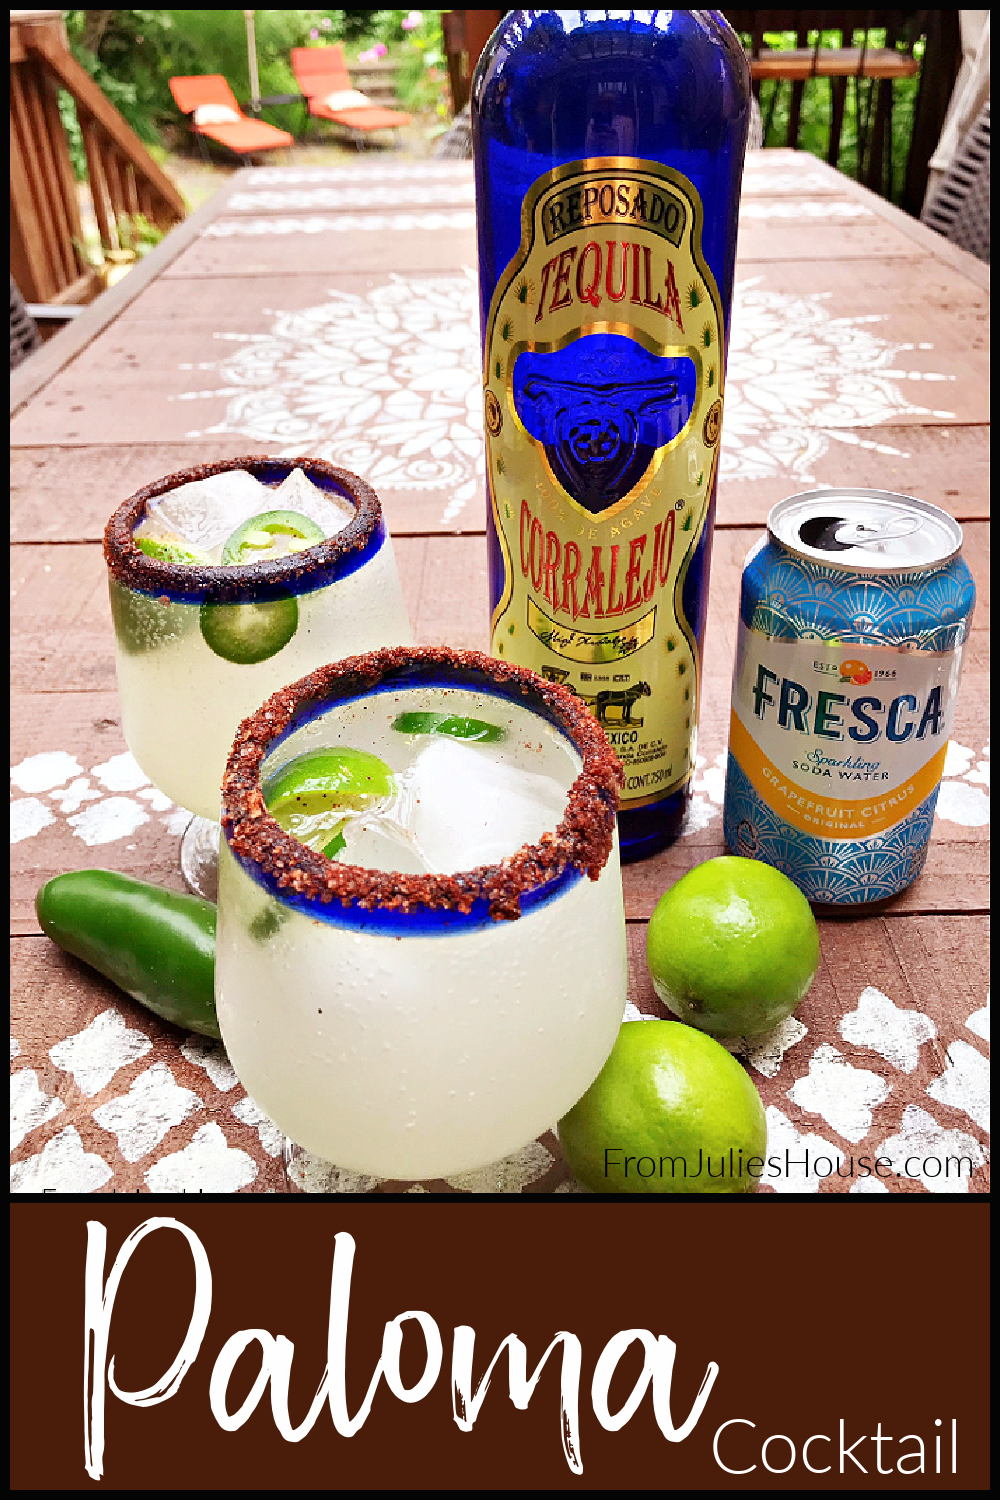 Today I'm sharing one of my very favorite cocktails - the Paloma. I make mine with reposado tequila, Fresca grapefruit soda, fresh lime and jalapeno, plus a chili/sugar/salt rim.